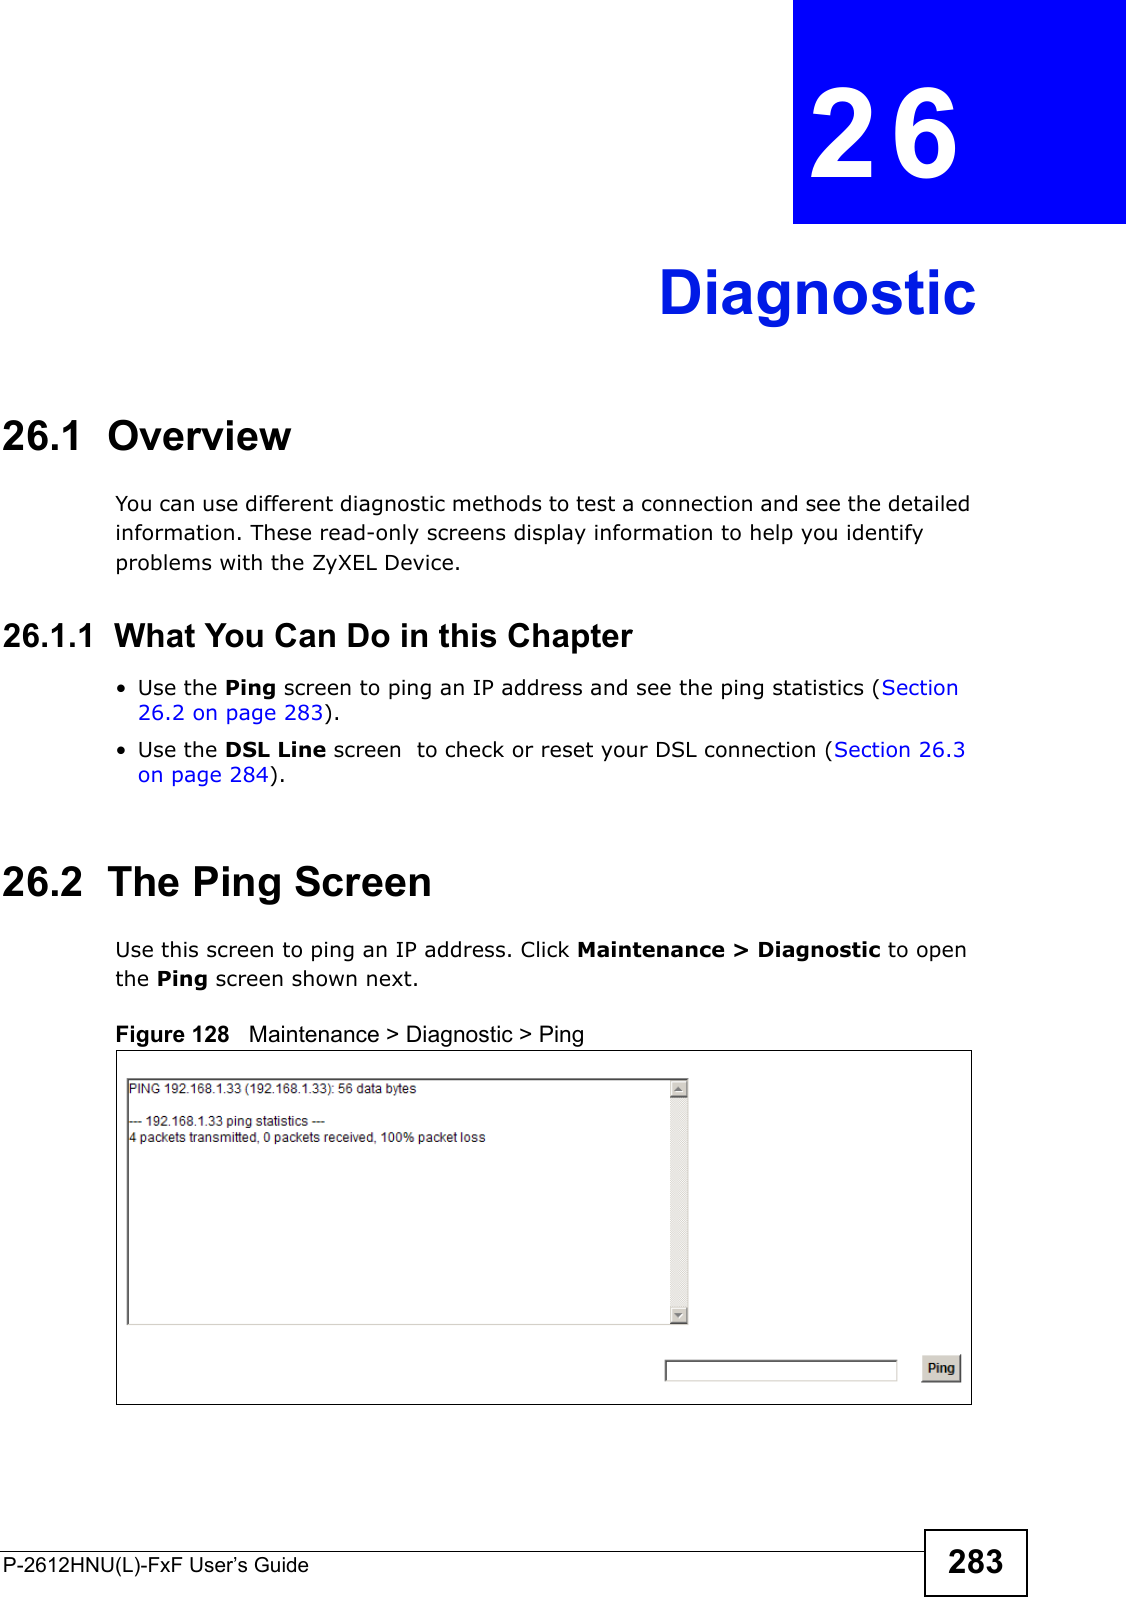 P-2612HNU(L)-FxF User’s Guide 283CHAPTER   26 Diagnostic26.1  OverviewYou can use different diagnostic methods to test a connection and see the detailed information. These read-only screens display information to help you identifyproblems with the ZyXEL Device.26.1.1  What You Can Do in this Chapter• Use the Ping screen to ping an IP address and see the ping statistics (Section 26.2 on page 283).• Use the DSL Line screen  to check or reset your DSL connection (Section 26.3 on page 284).26.2  The Ping Screen Use this screen to ping an IP address. Click Maintenance &gt; Diagnostic to openthe Ping screen shown next.Figure 128   Maintenance &gt; Diagnostic &gt; Ping